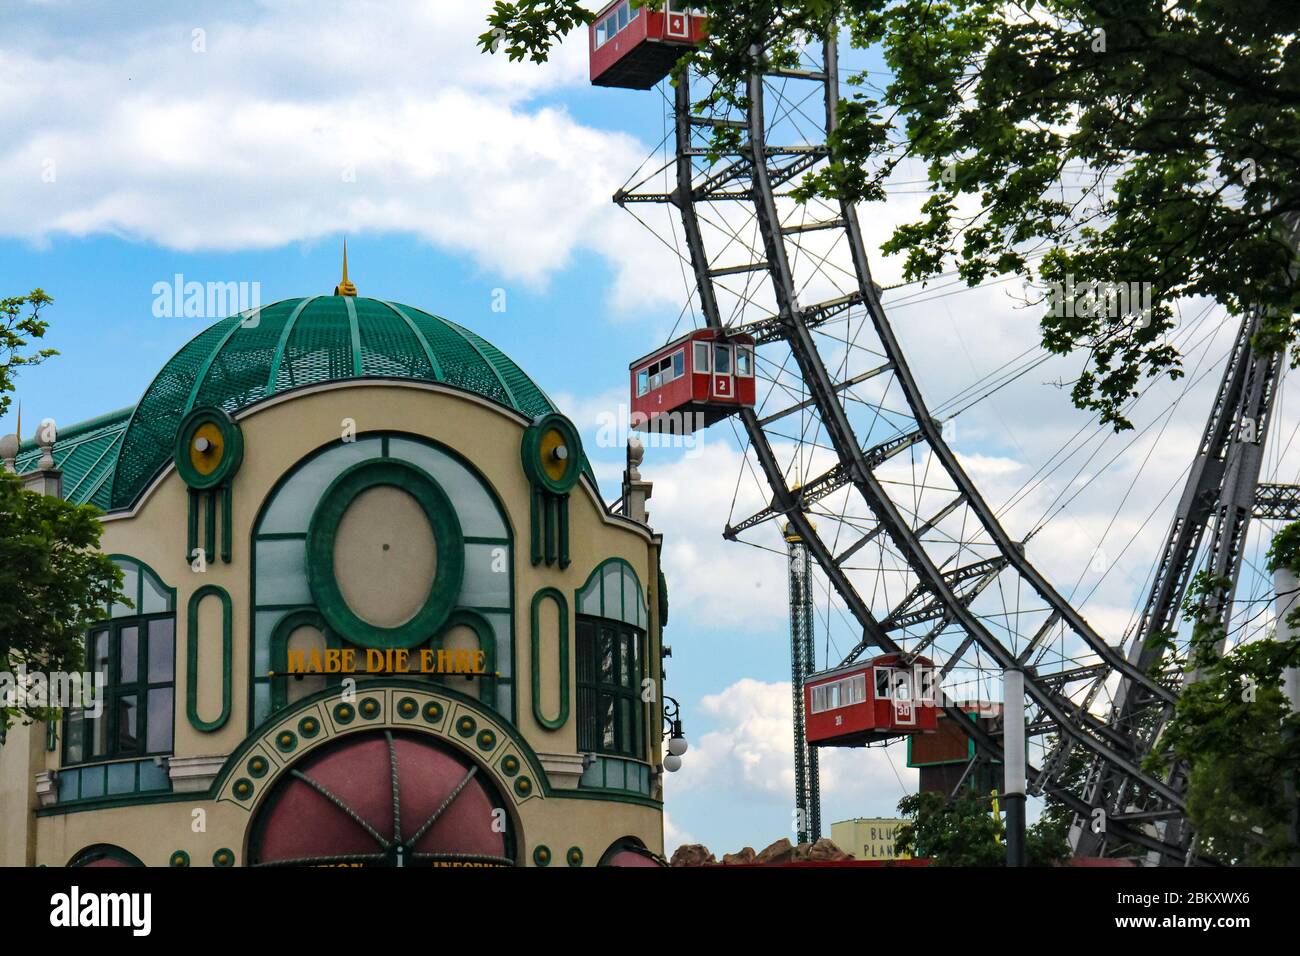 Ferris wheel and welcome building with the Austrian greeting 'Habe die Ehre' at Prater, the public amusement park of Vienna, capital of Austria. Stock Photo